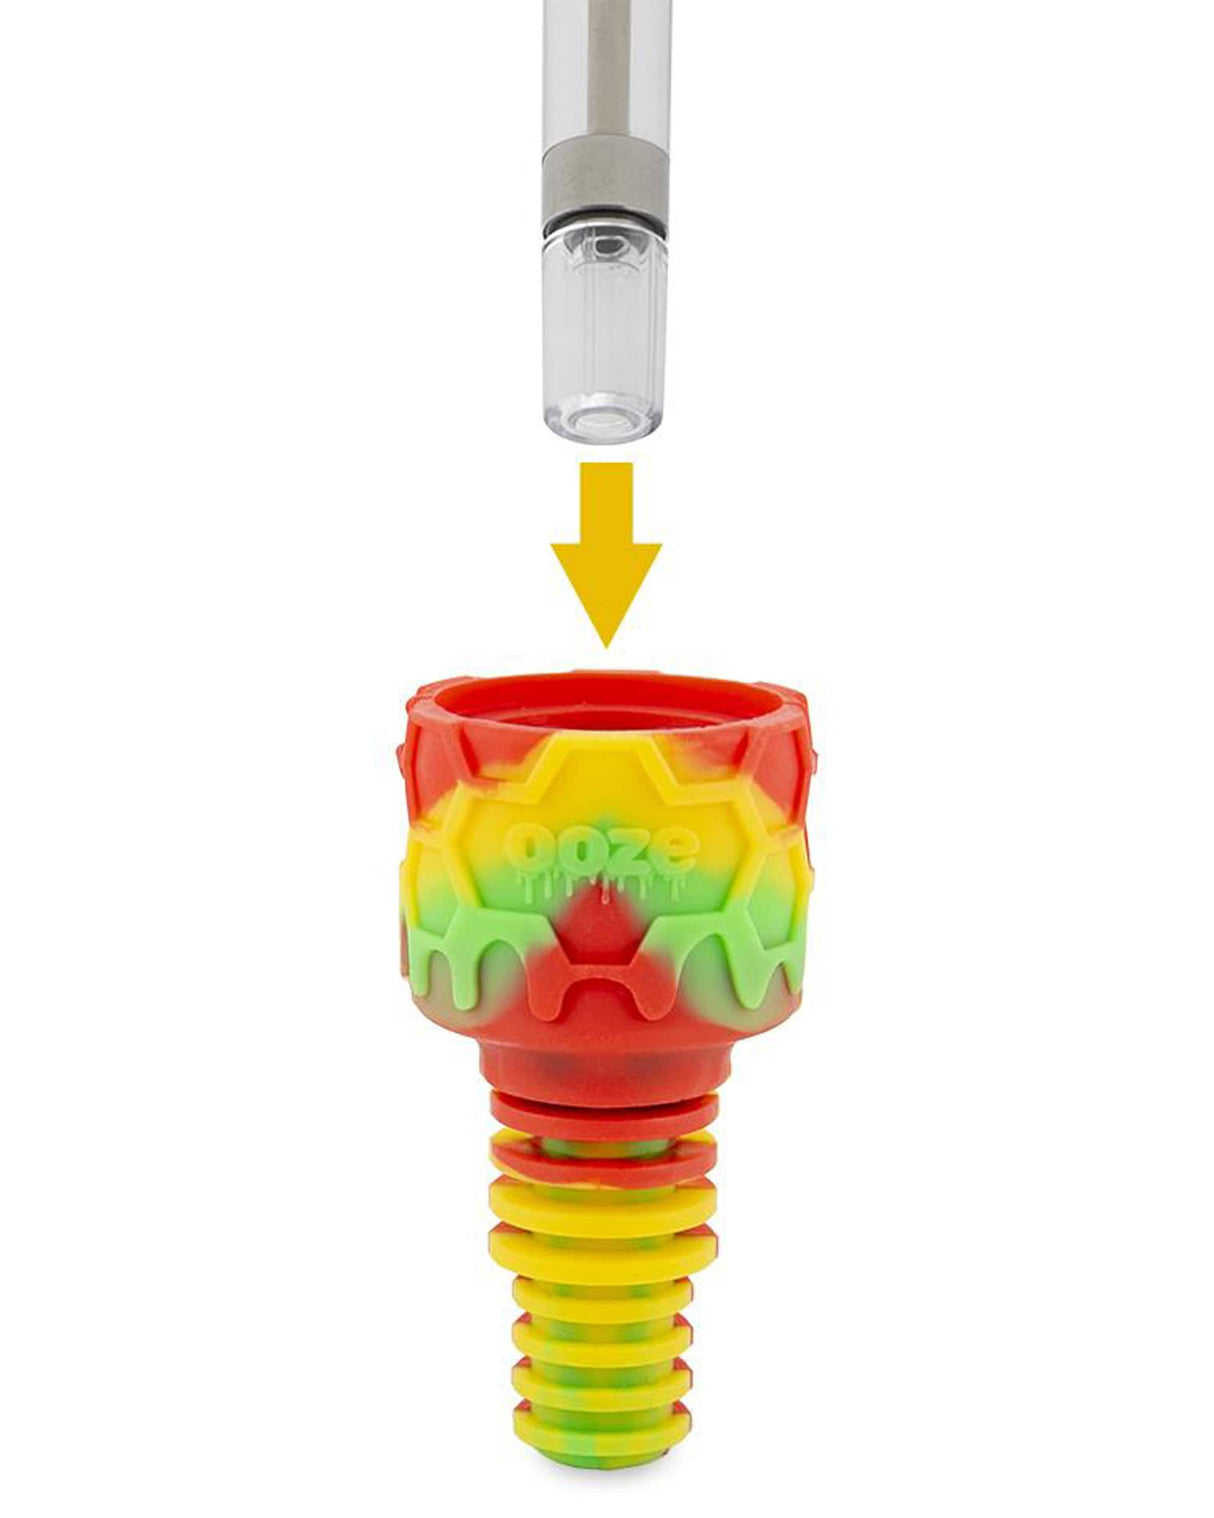 Ooze Ozone Silicone Bong Bowl with Slitted Percolator, Rasta Colors - Front View